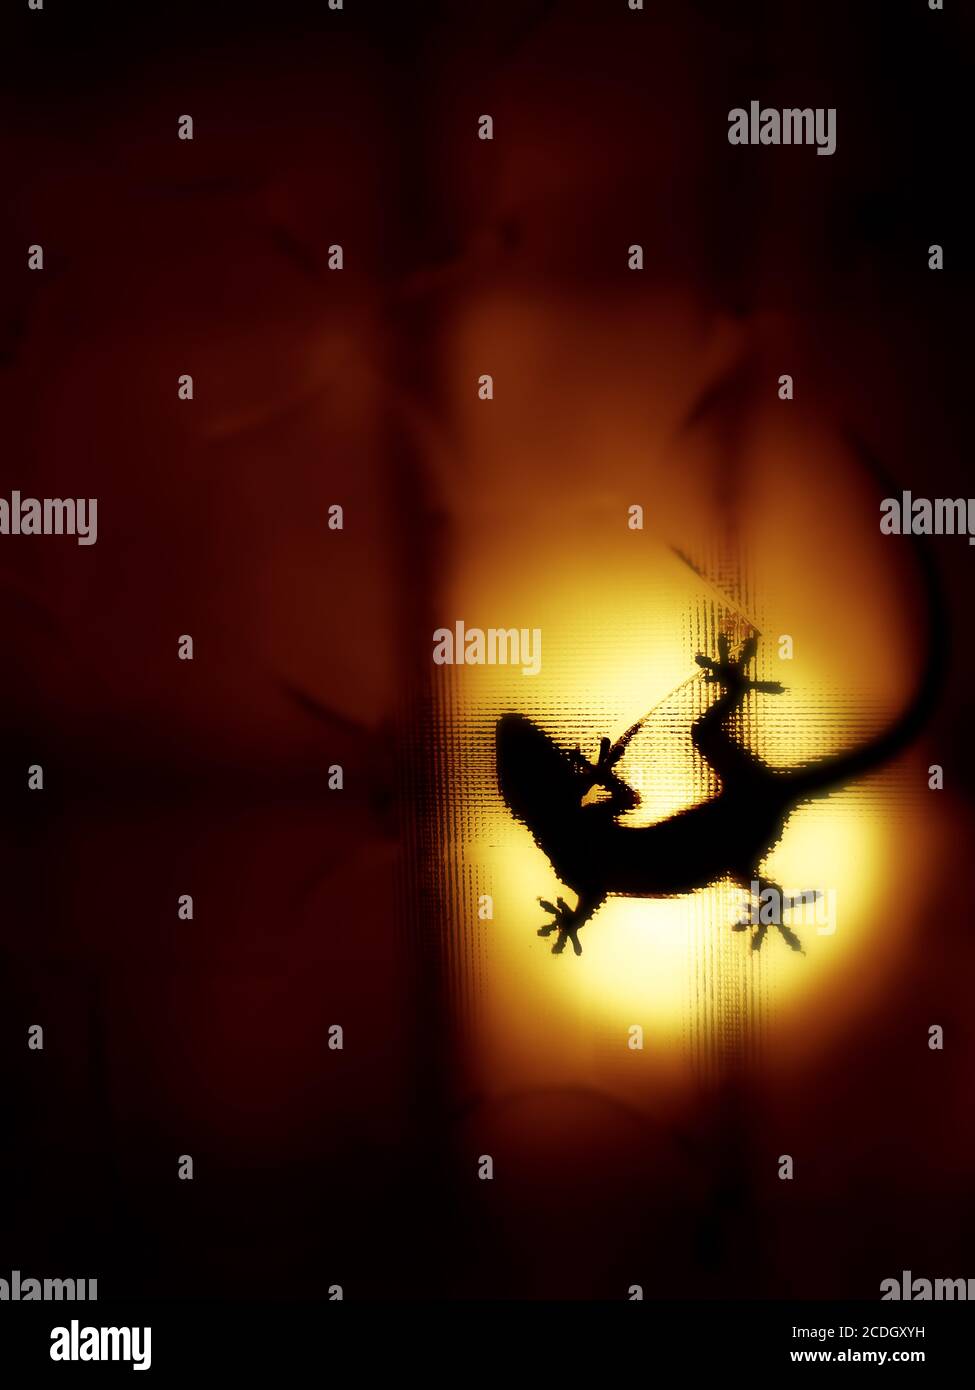 House gecko shadow spotted on orange  backlight of the textured glass. Stock Photo